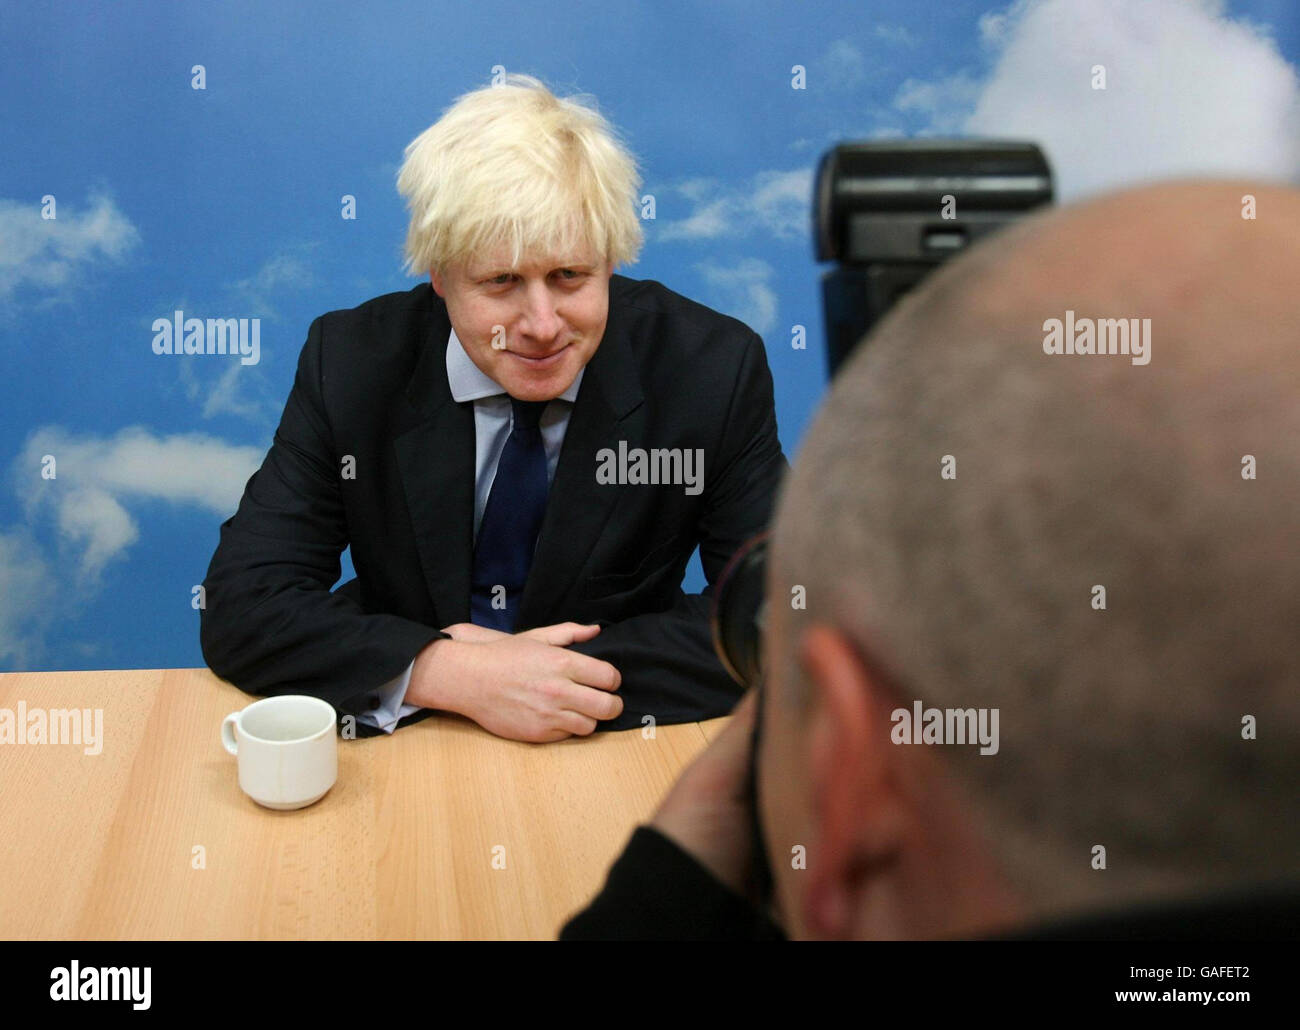 The Conservative Candidate for Mayor of London, Boris Johnson, announces his proposal to reform the existing London Health Commission and ring-fence London's spending on public health at the Ideas Space in central London. Stock Photo